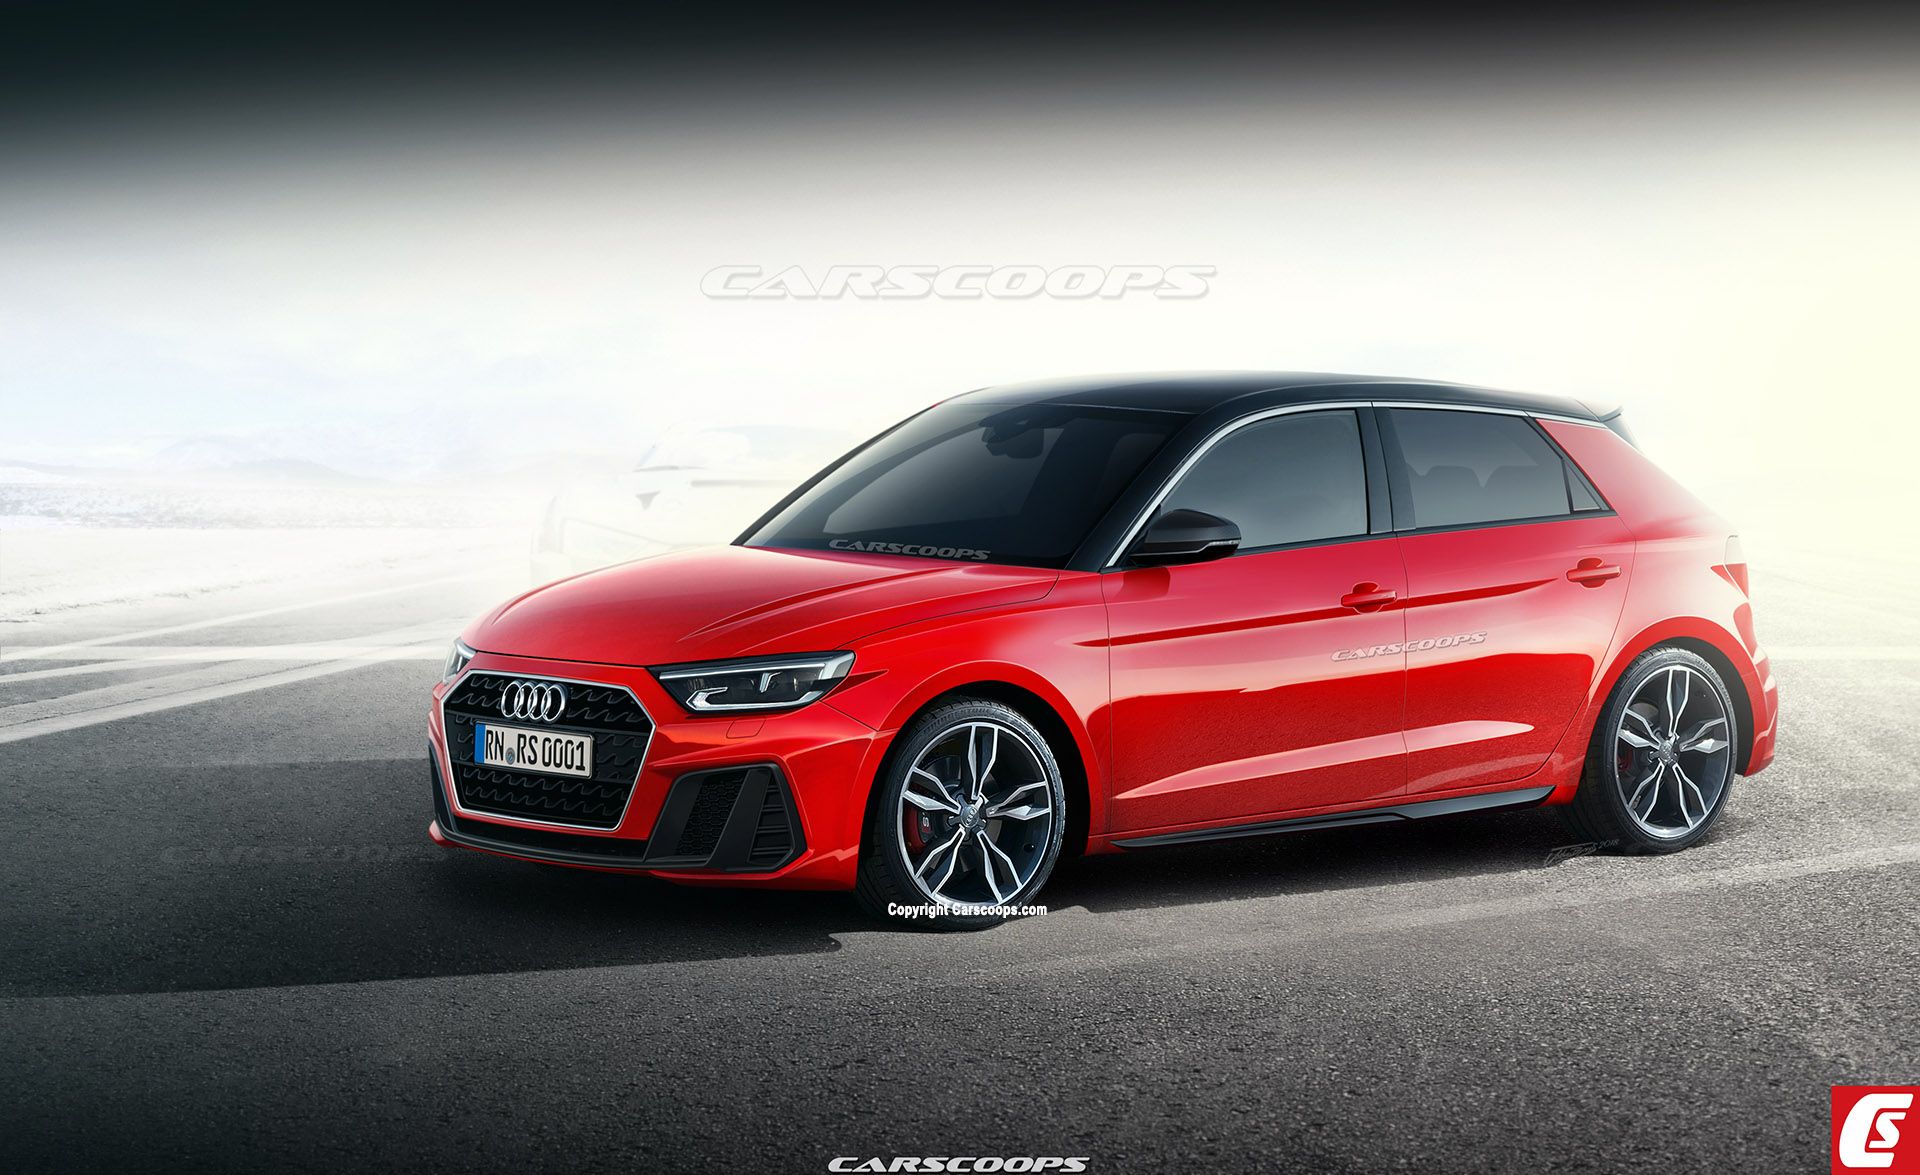 2019 Audi A1 Coming This Year: What It'll Look Like And Other Key Details